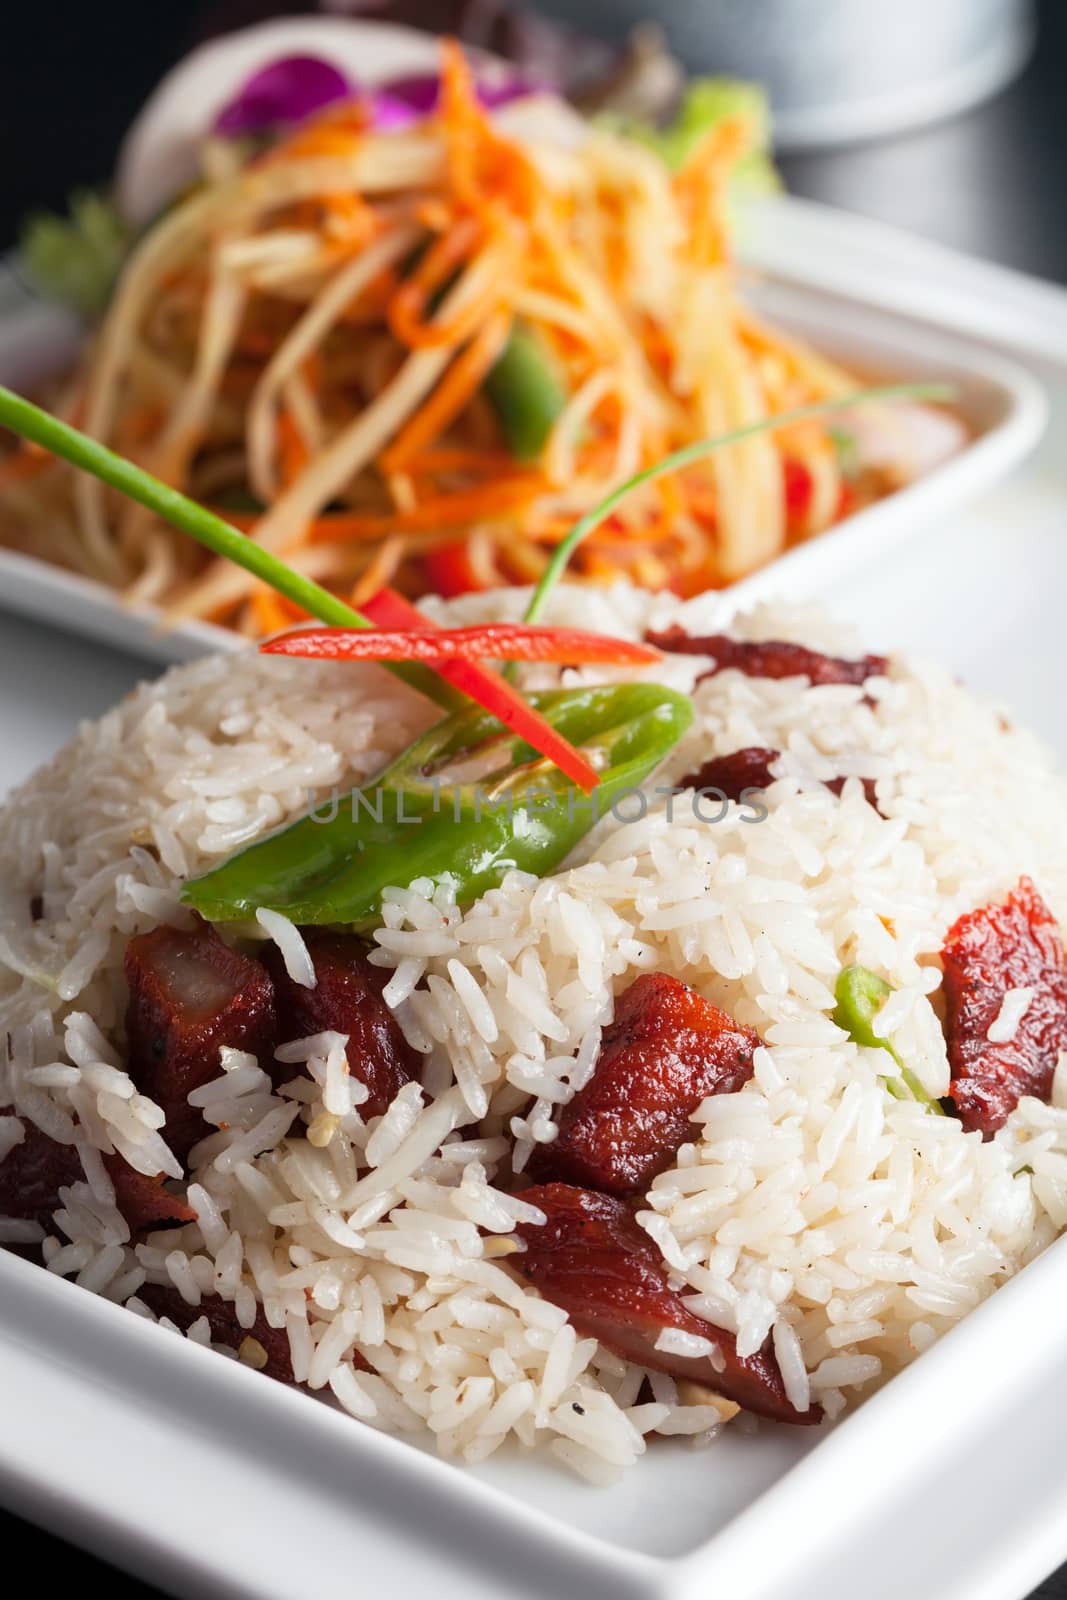 Thai Pork and Rice with Som Tum Salad by graficallyminded